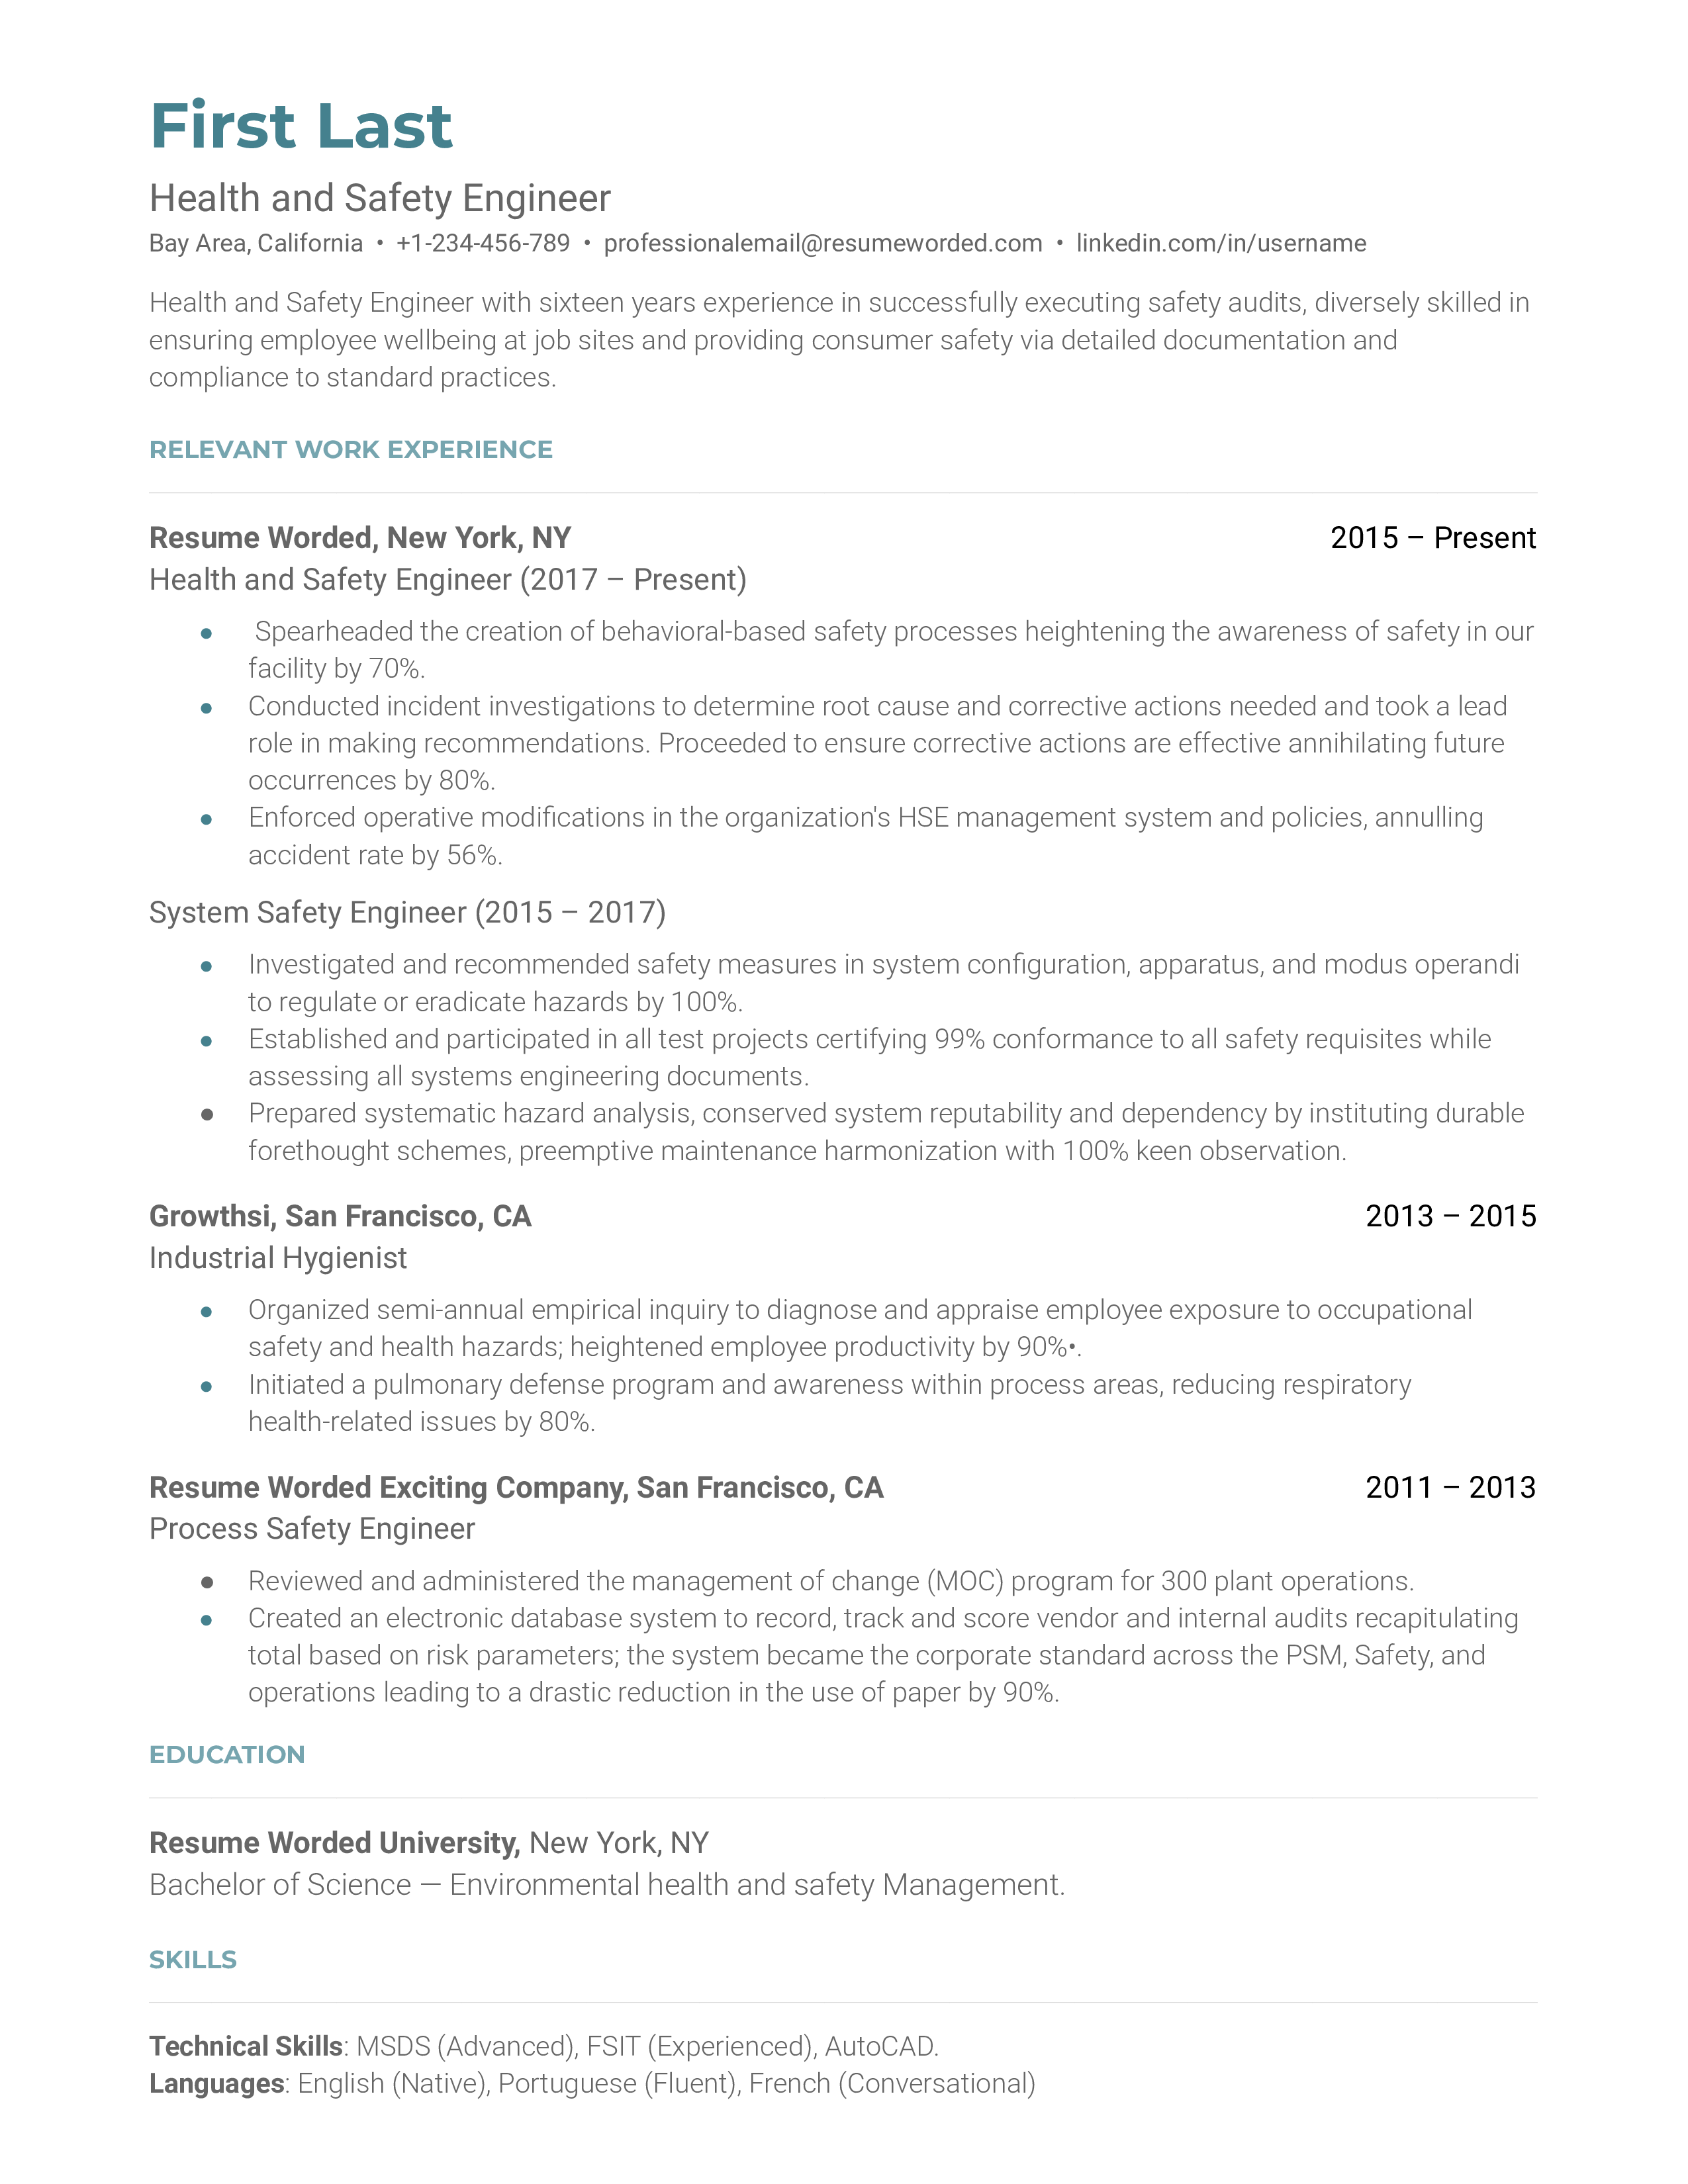 A health and safety engineer resume example that emphasized work experience in chronological order 